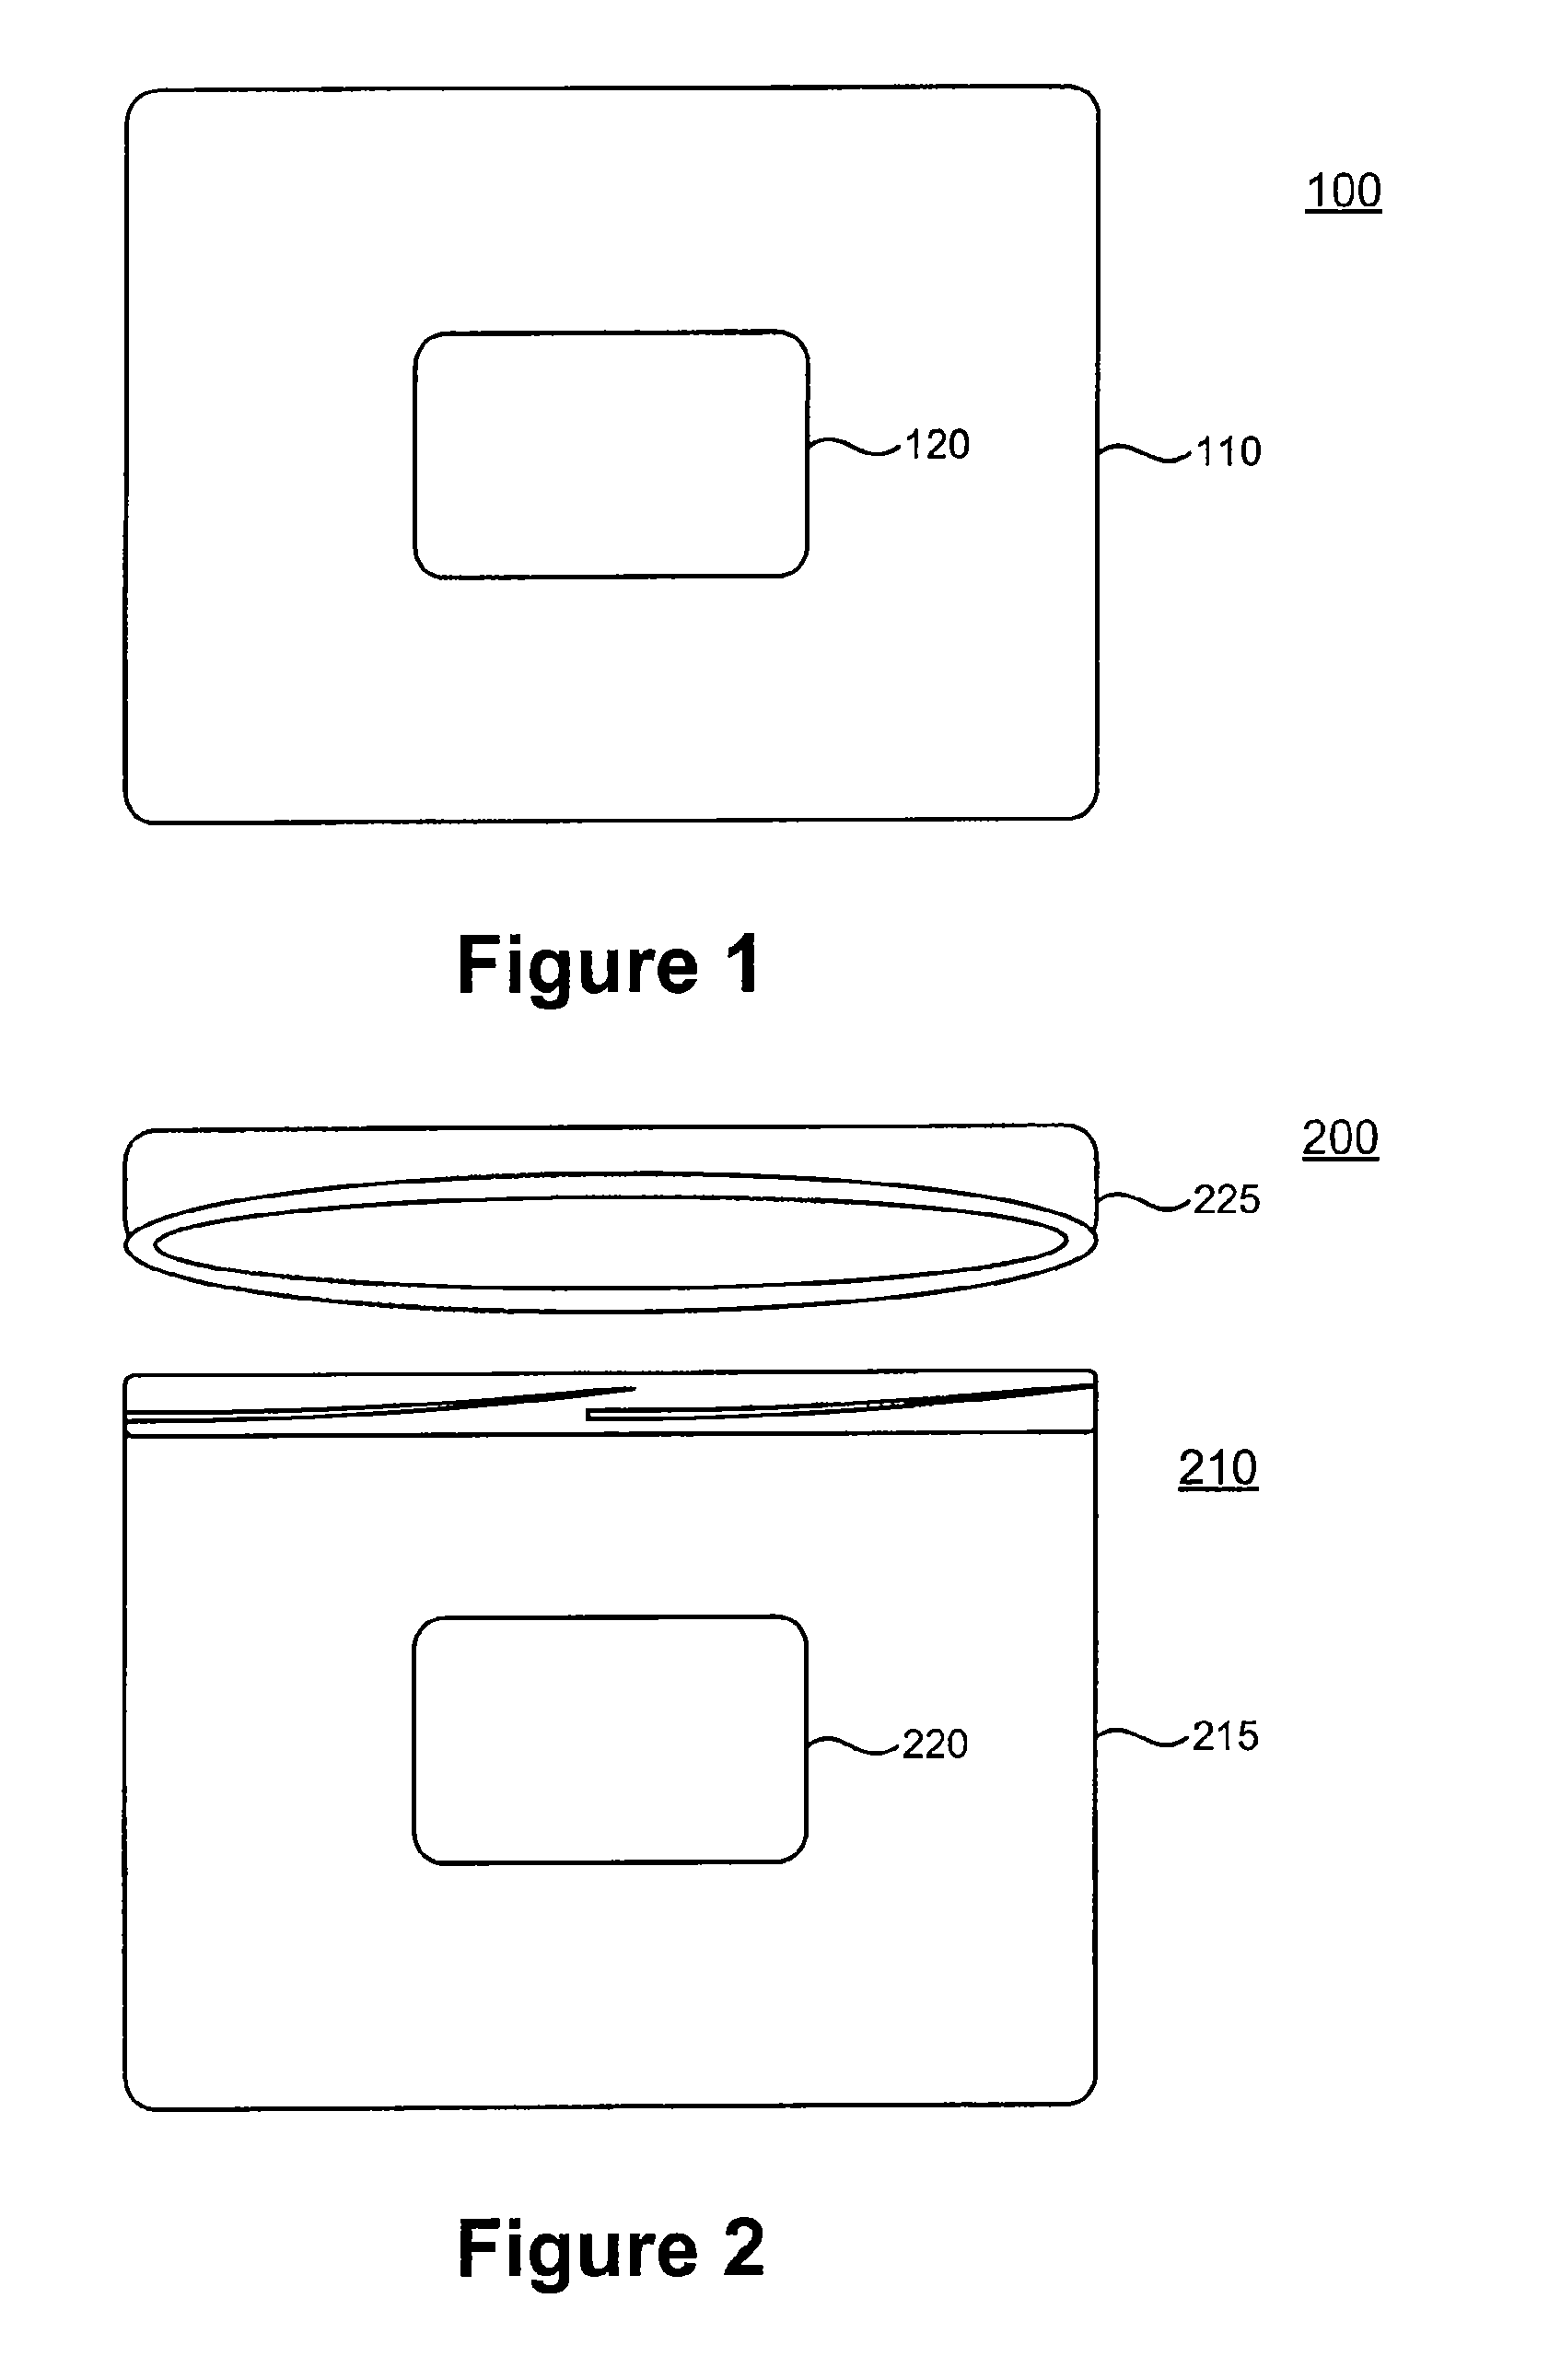 Method and system for underwater light display